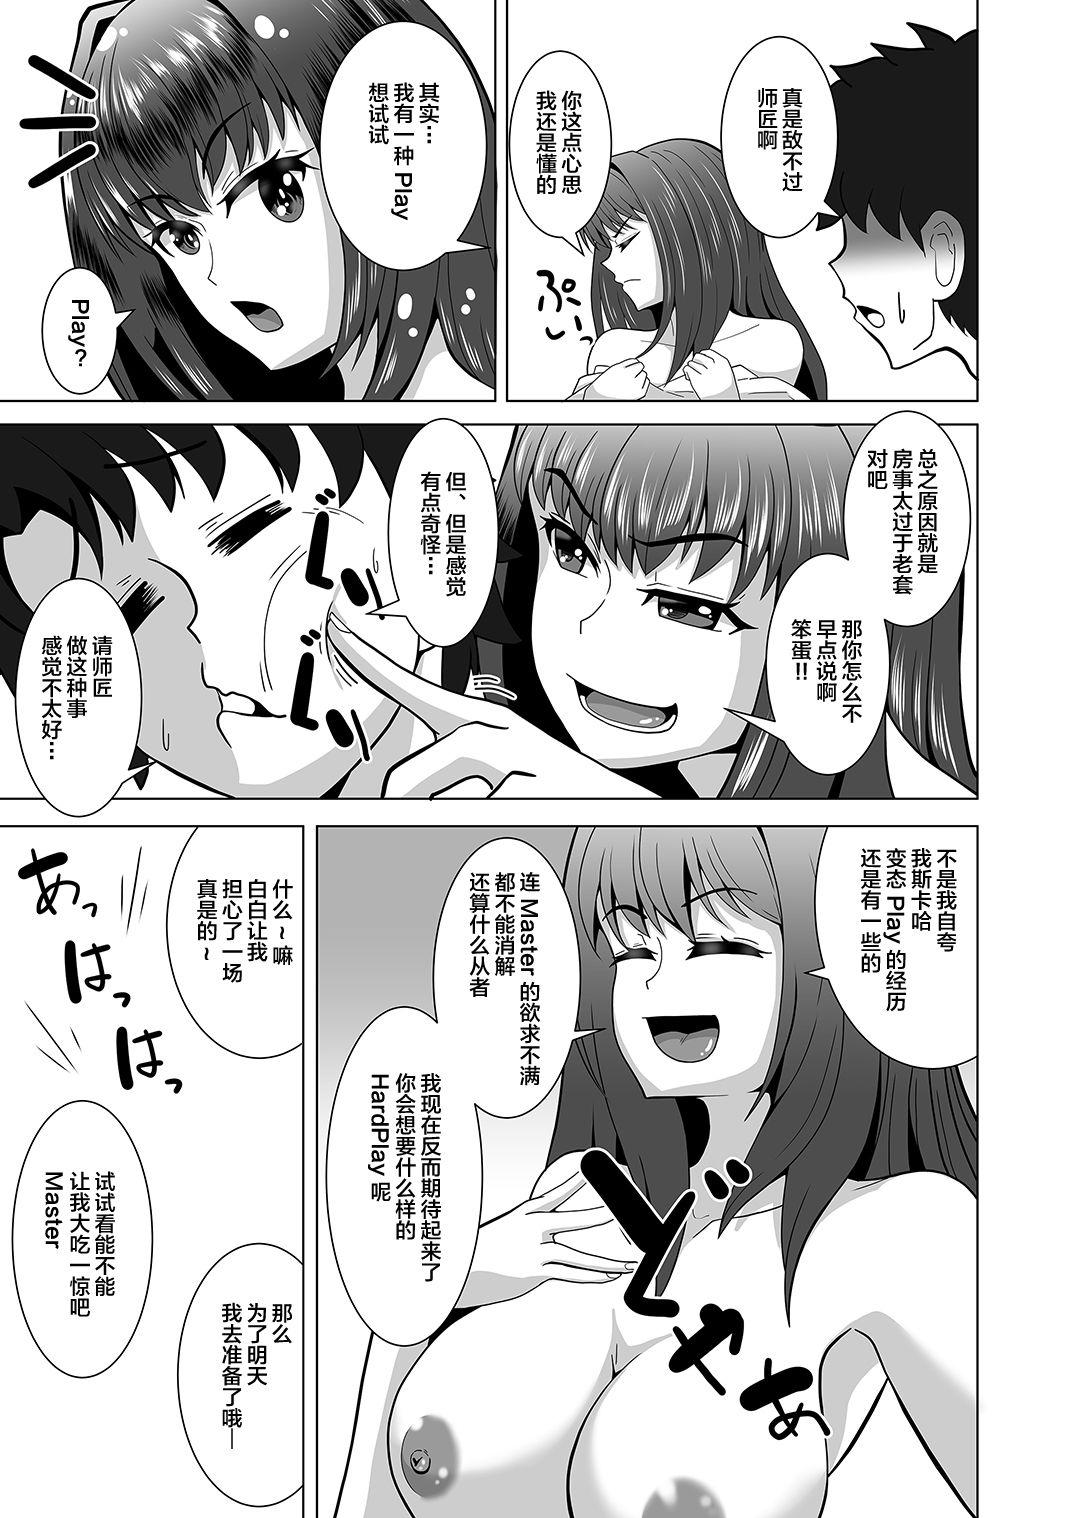 Straight Porn Scathach-chan to Issho - Fate grand order Korean - Page 5